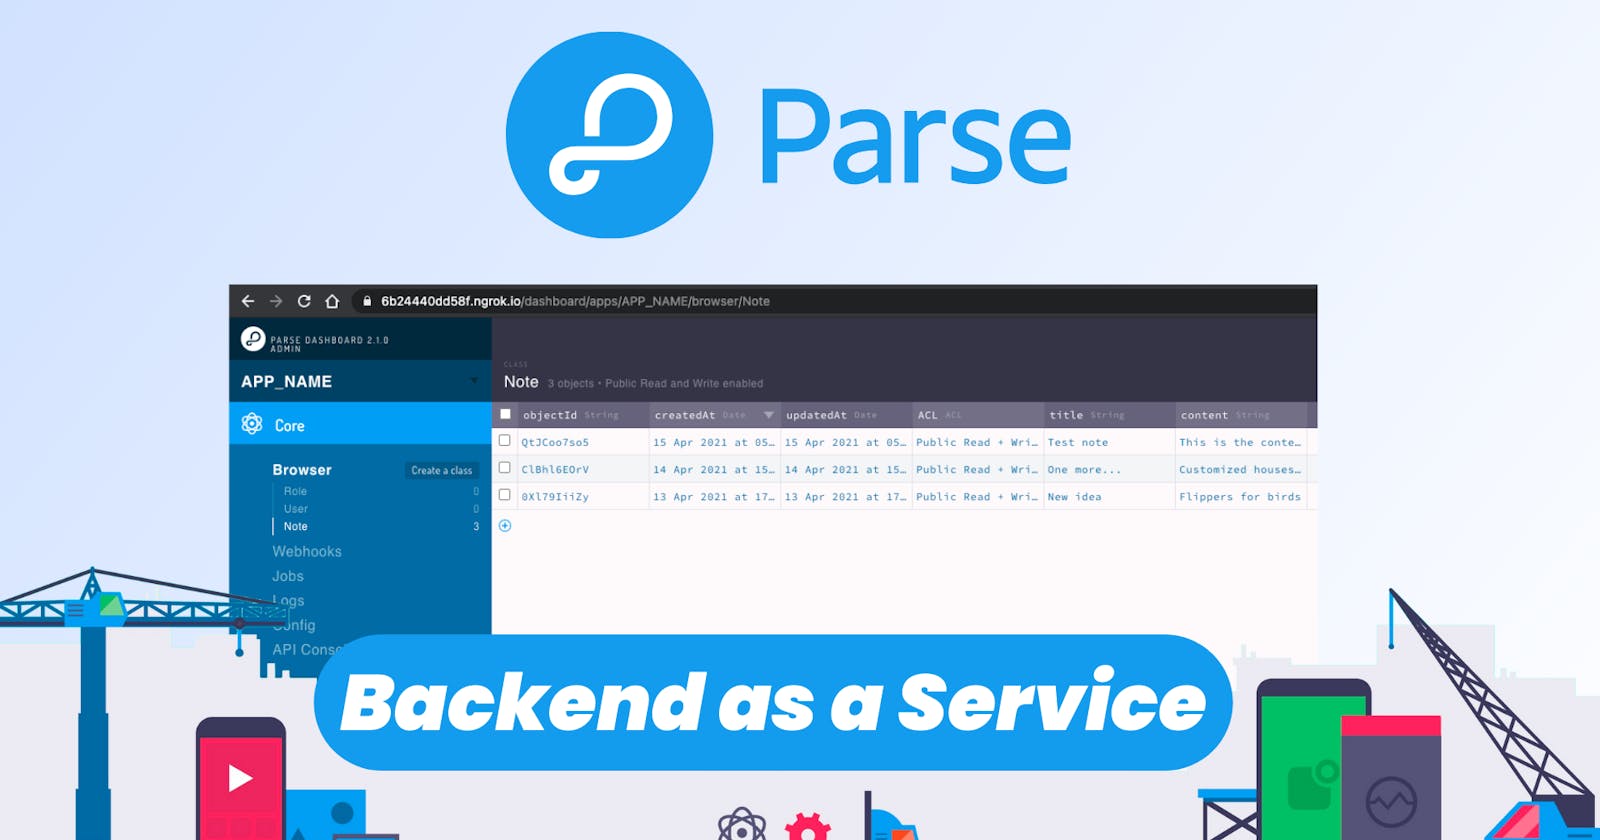 Parse: Free Open Source Backend as a Service